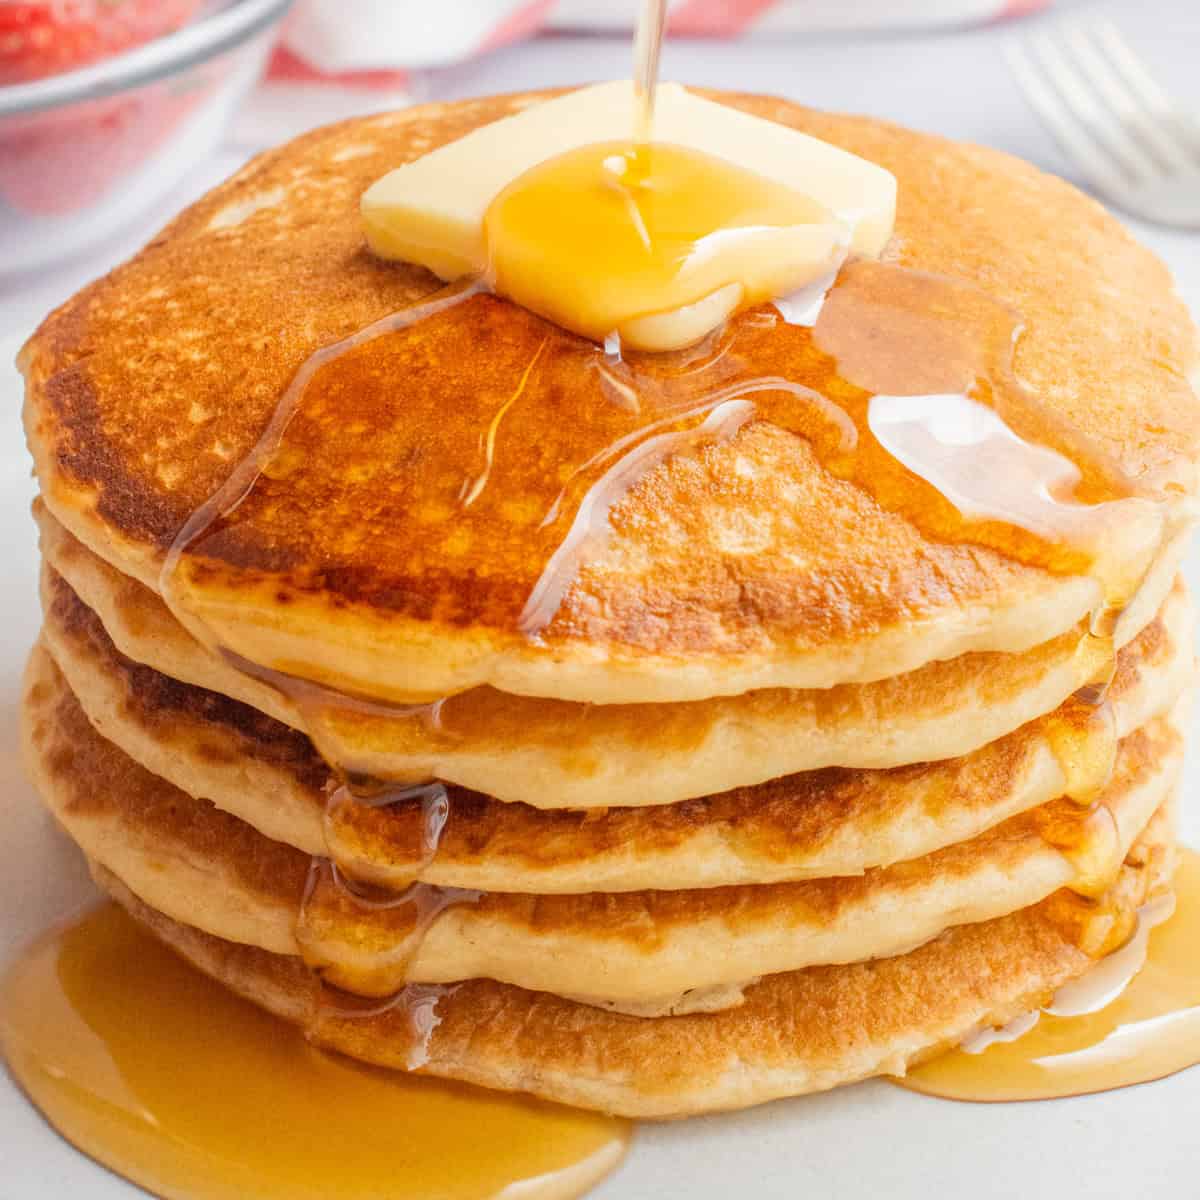 A stack of vegan buttermilk pancakes topped with butter and drizzled with syrup.A stack of vegan buttermilk pancakes topped with butter and drizzled with syrup.